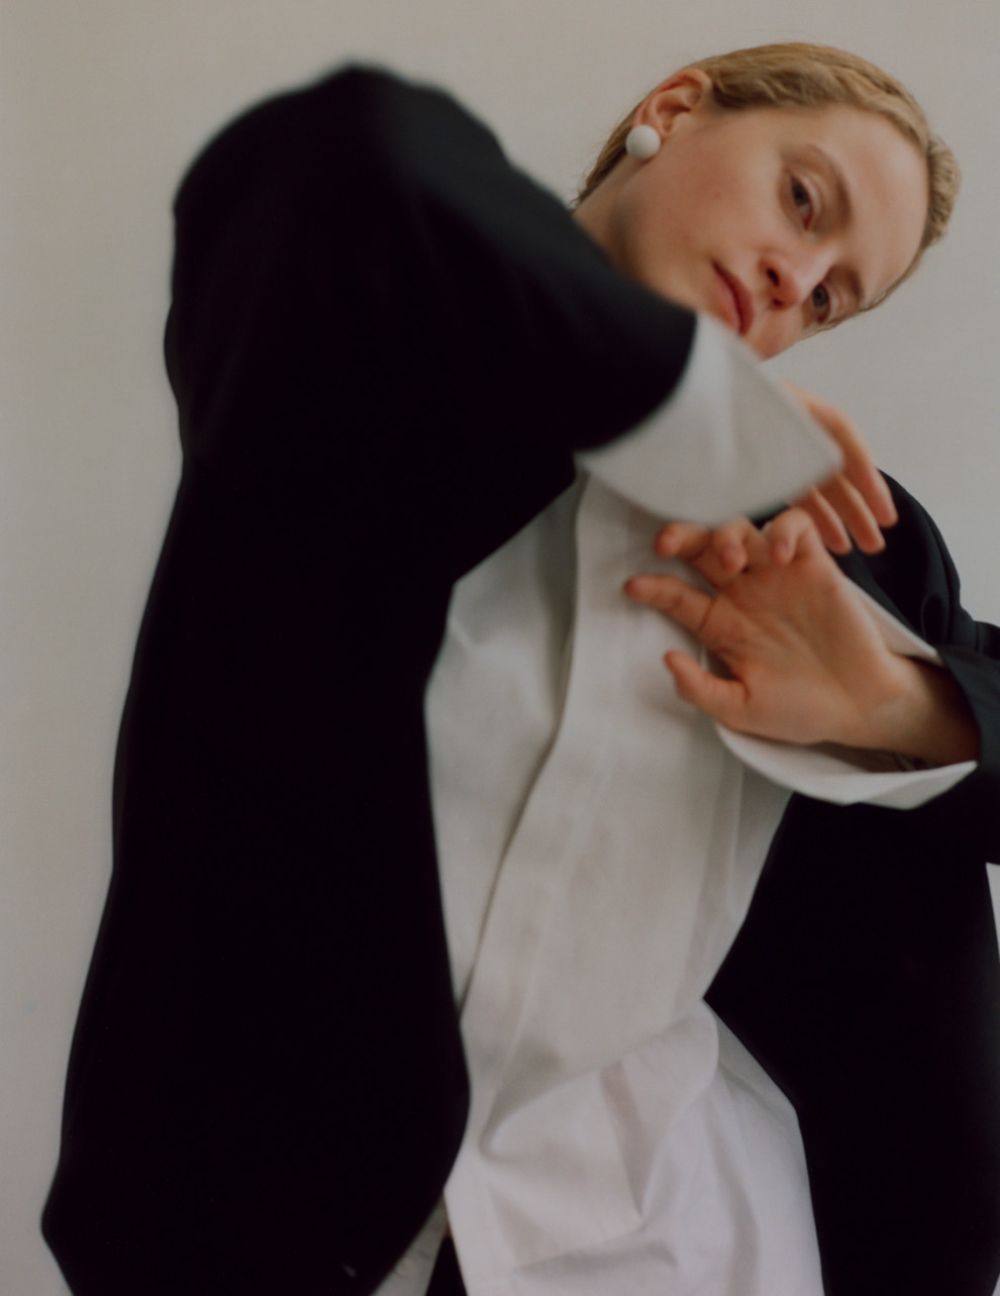  Clothing & Accessories: Wool Jacket and Pants by Chalayan; Cotton shirt by Turnbull & Asser; Cotton shorts by Miu Miu; Resin earrings by Christopher Kane / Photographer: Lukasz Pukowiec. Stylist: Adonis Kentros. Hair Stylist: Gor Duryan. Makeup Artist: Anna Stykala. Set Designer: Anna Szczesny 